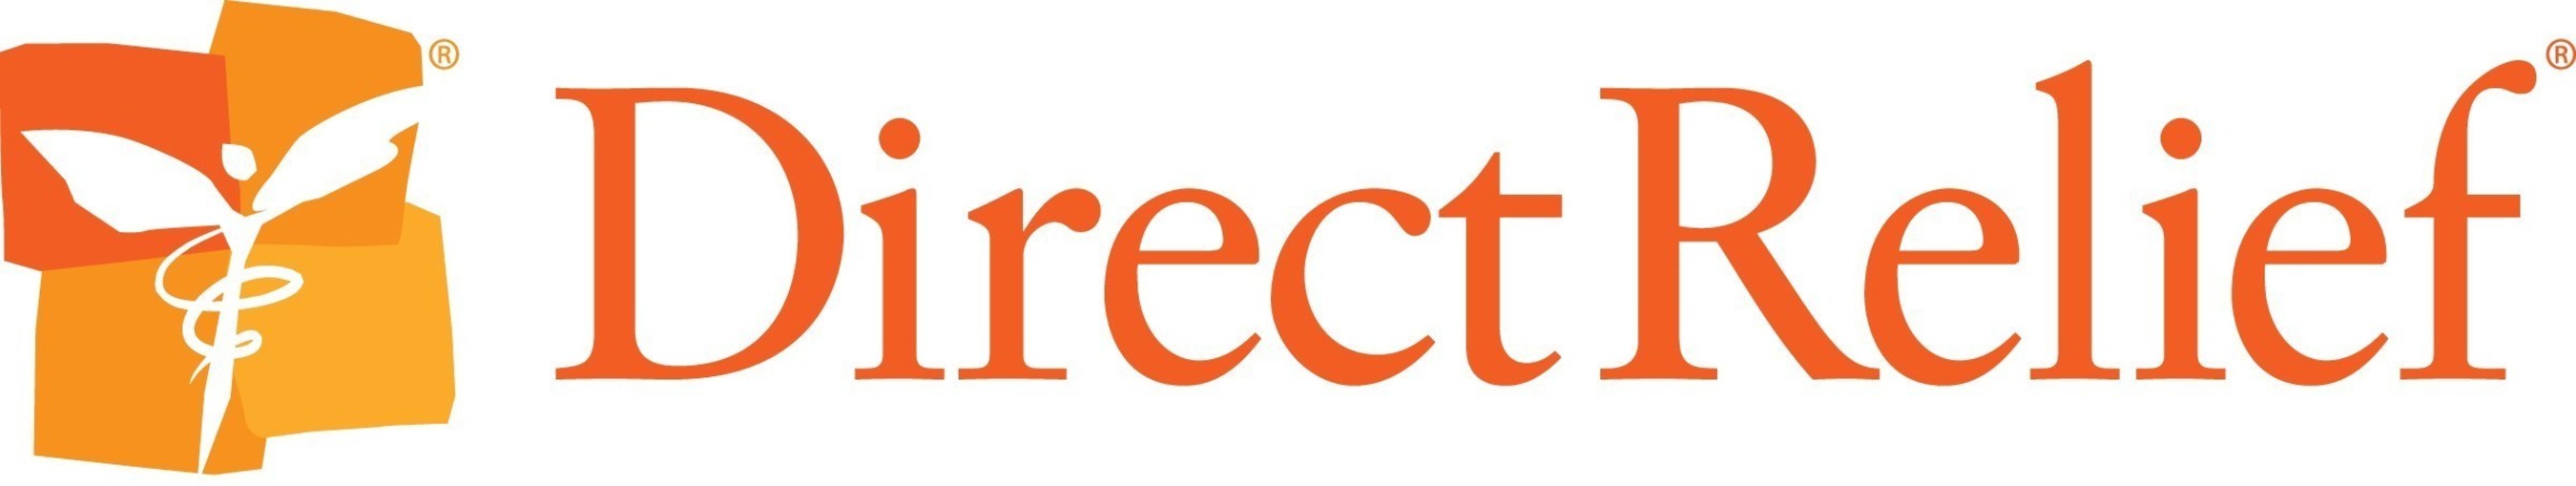 Direct Relief logo